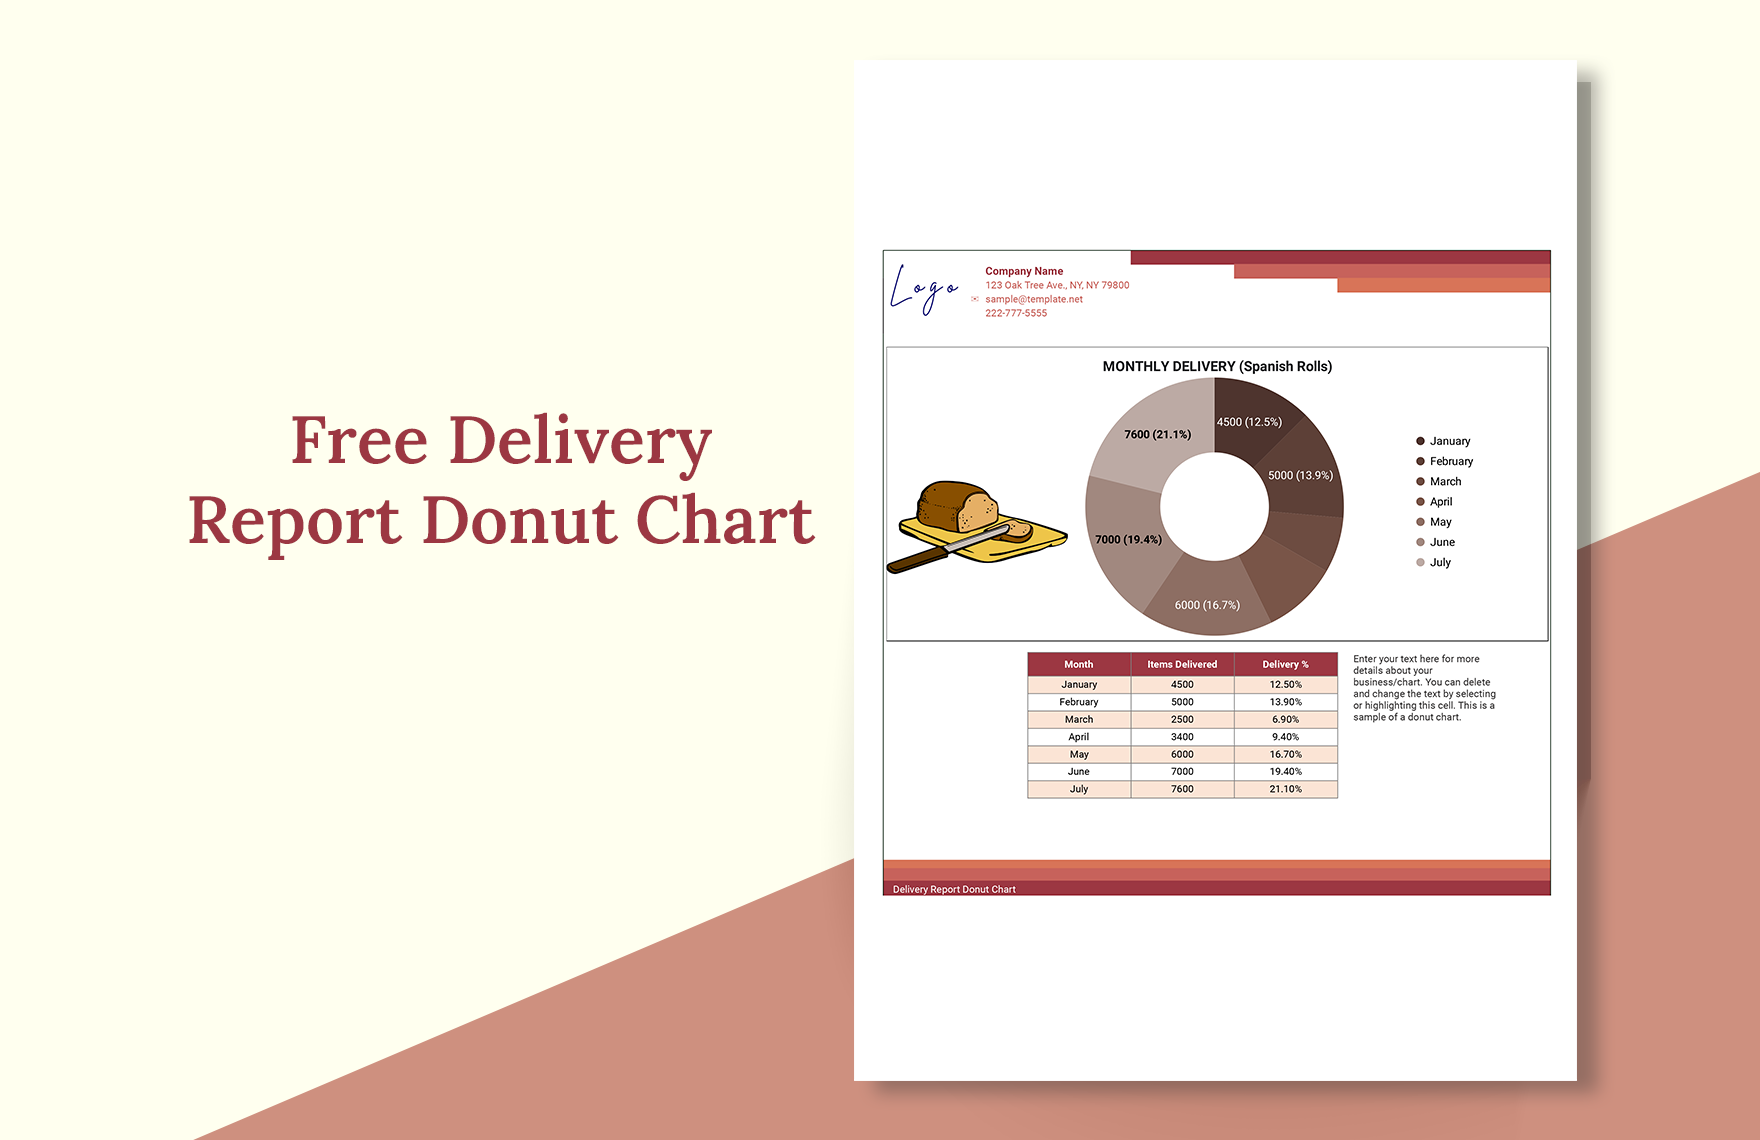 Free Delivery Report Donut Chart